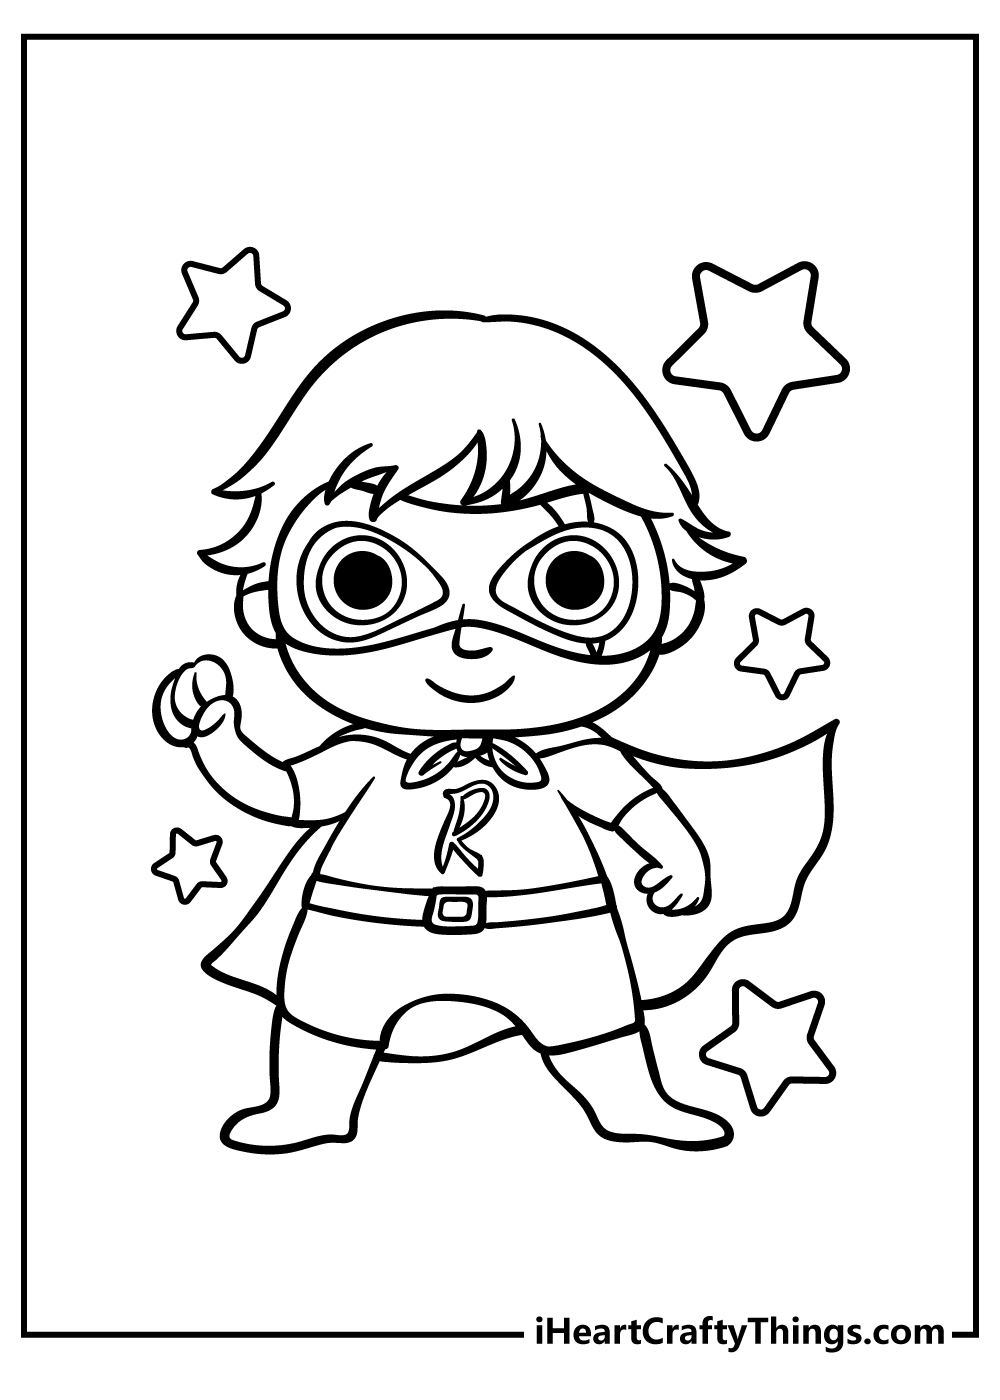 Ryan Coloring Pages for preschoolers free printable